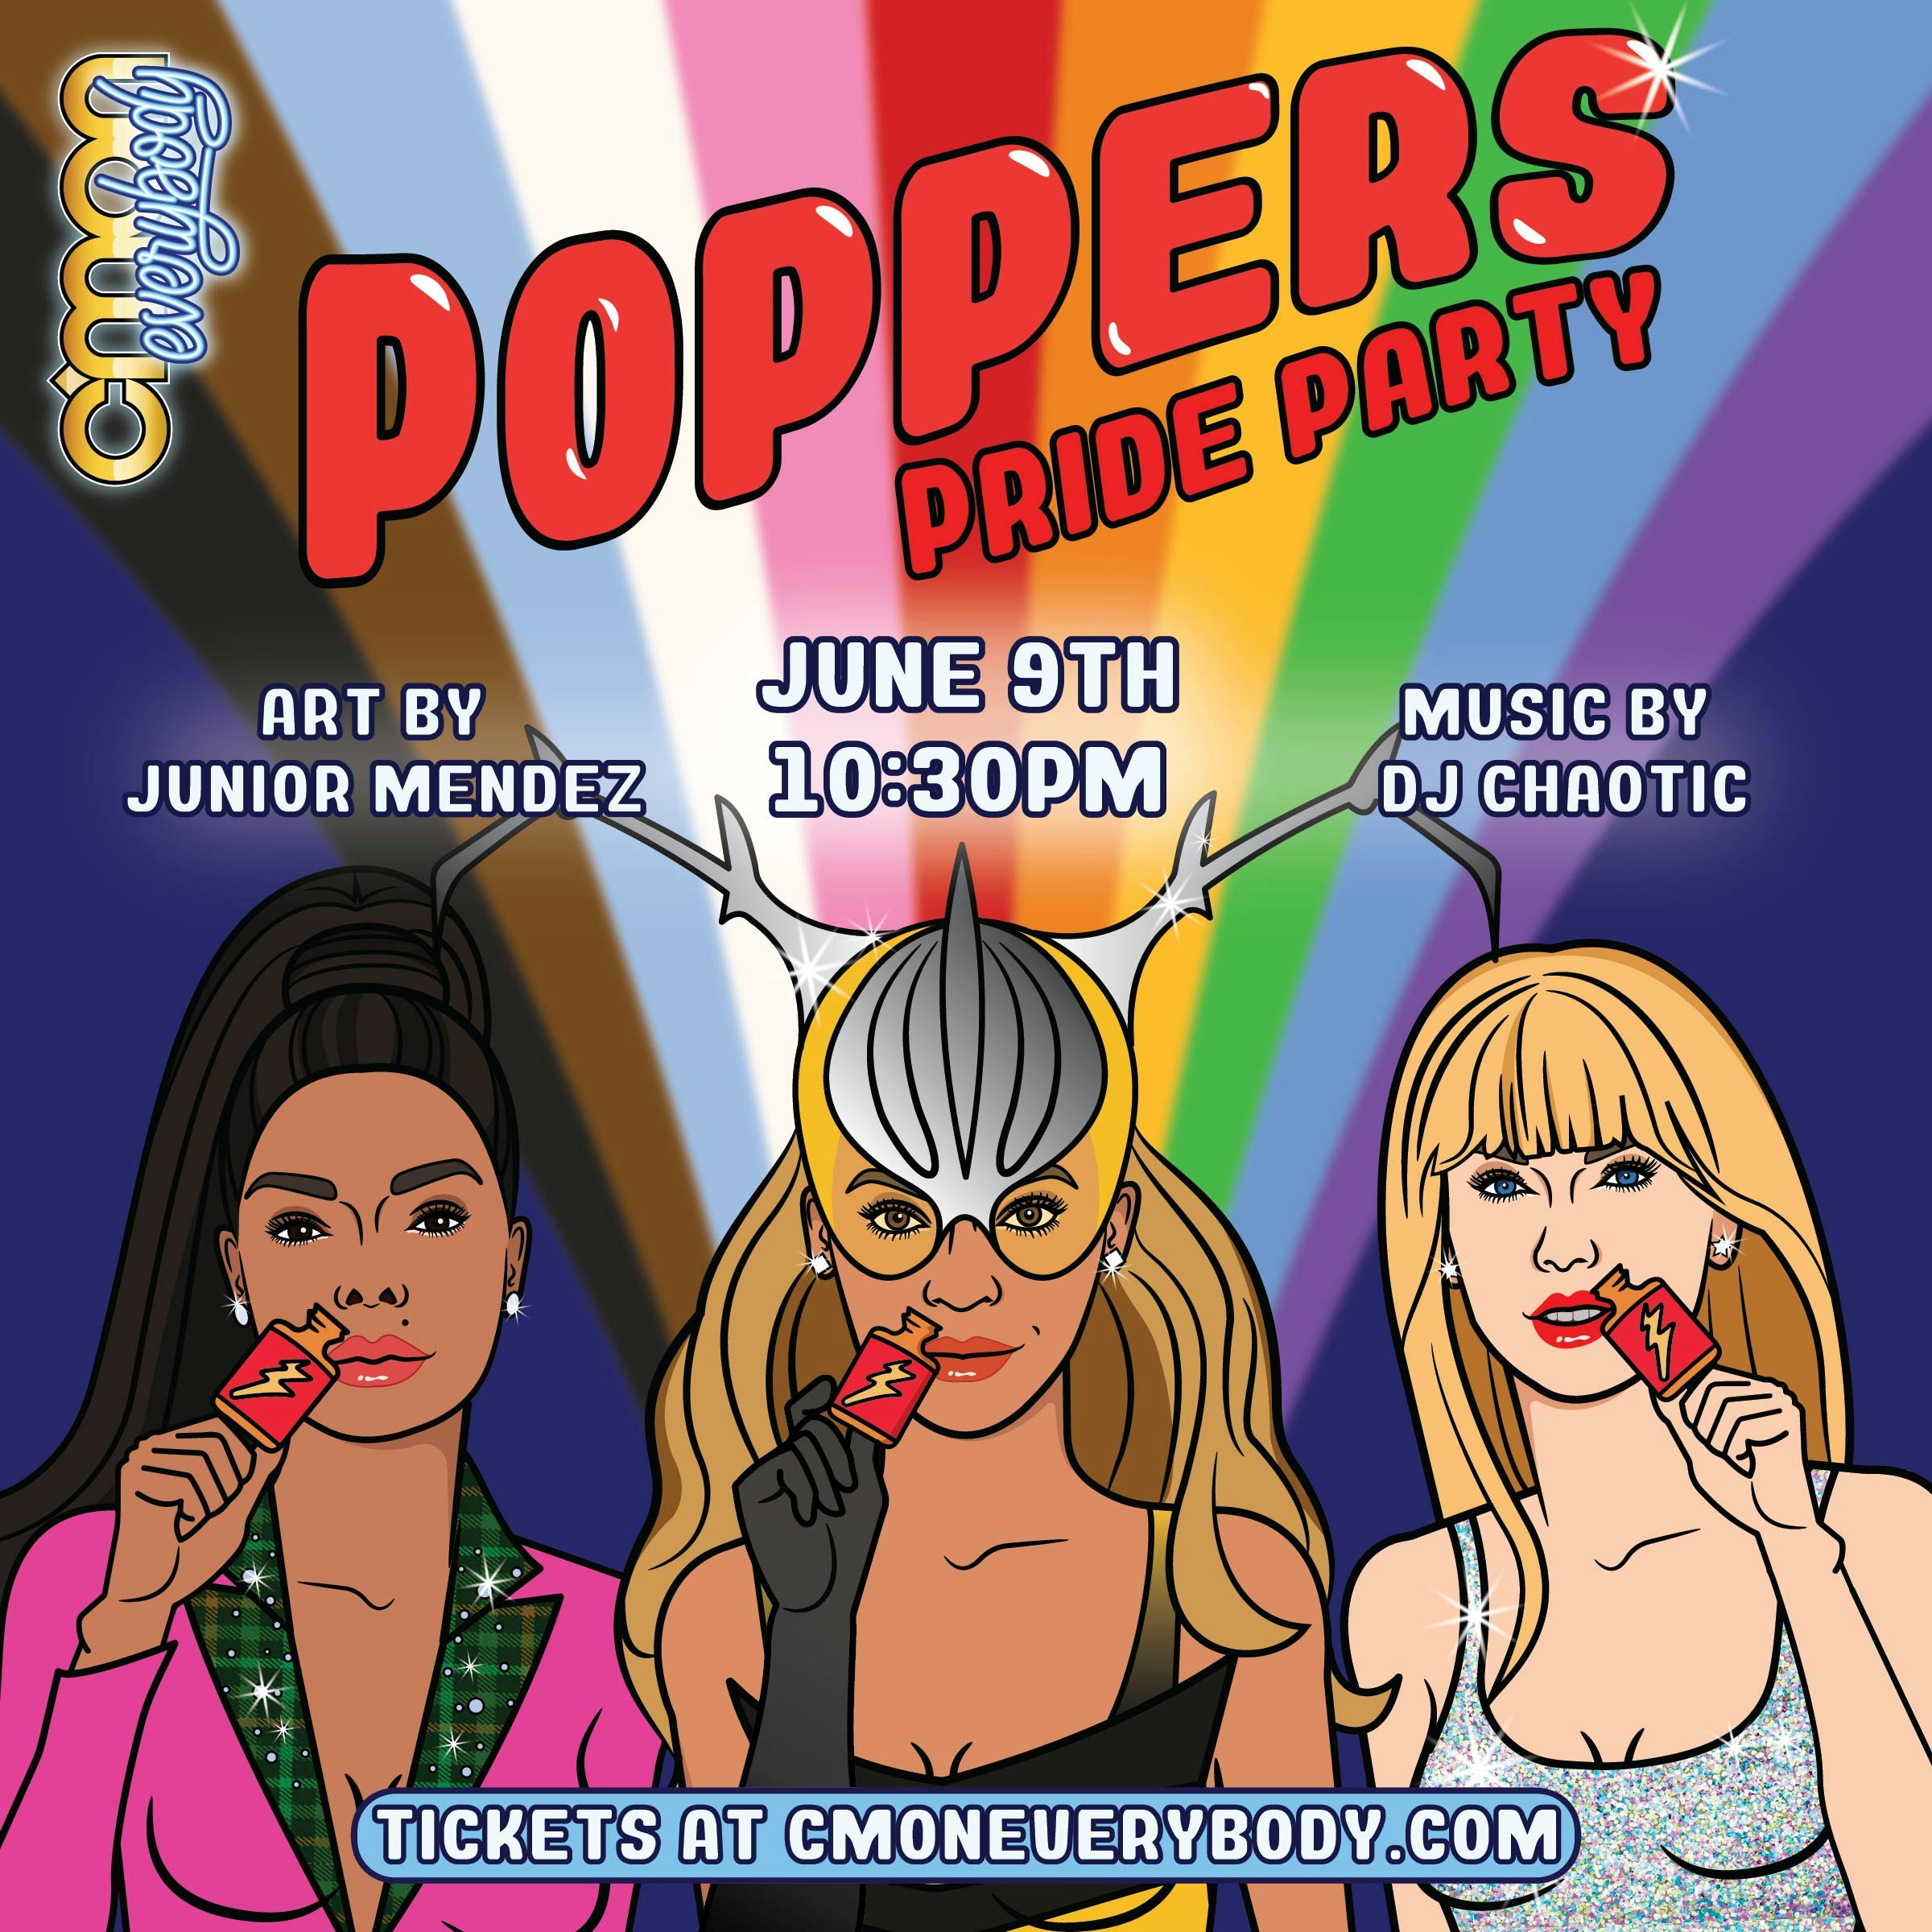 Poppers *Pride Party*